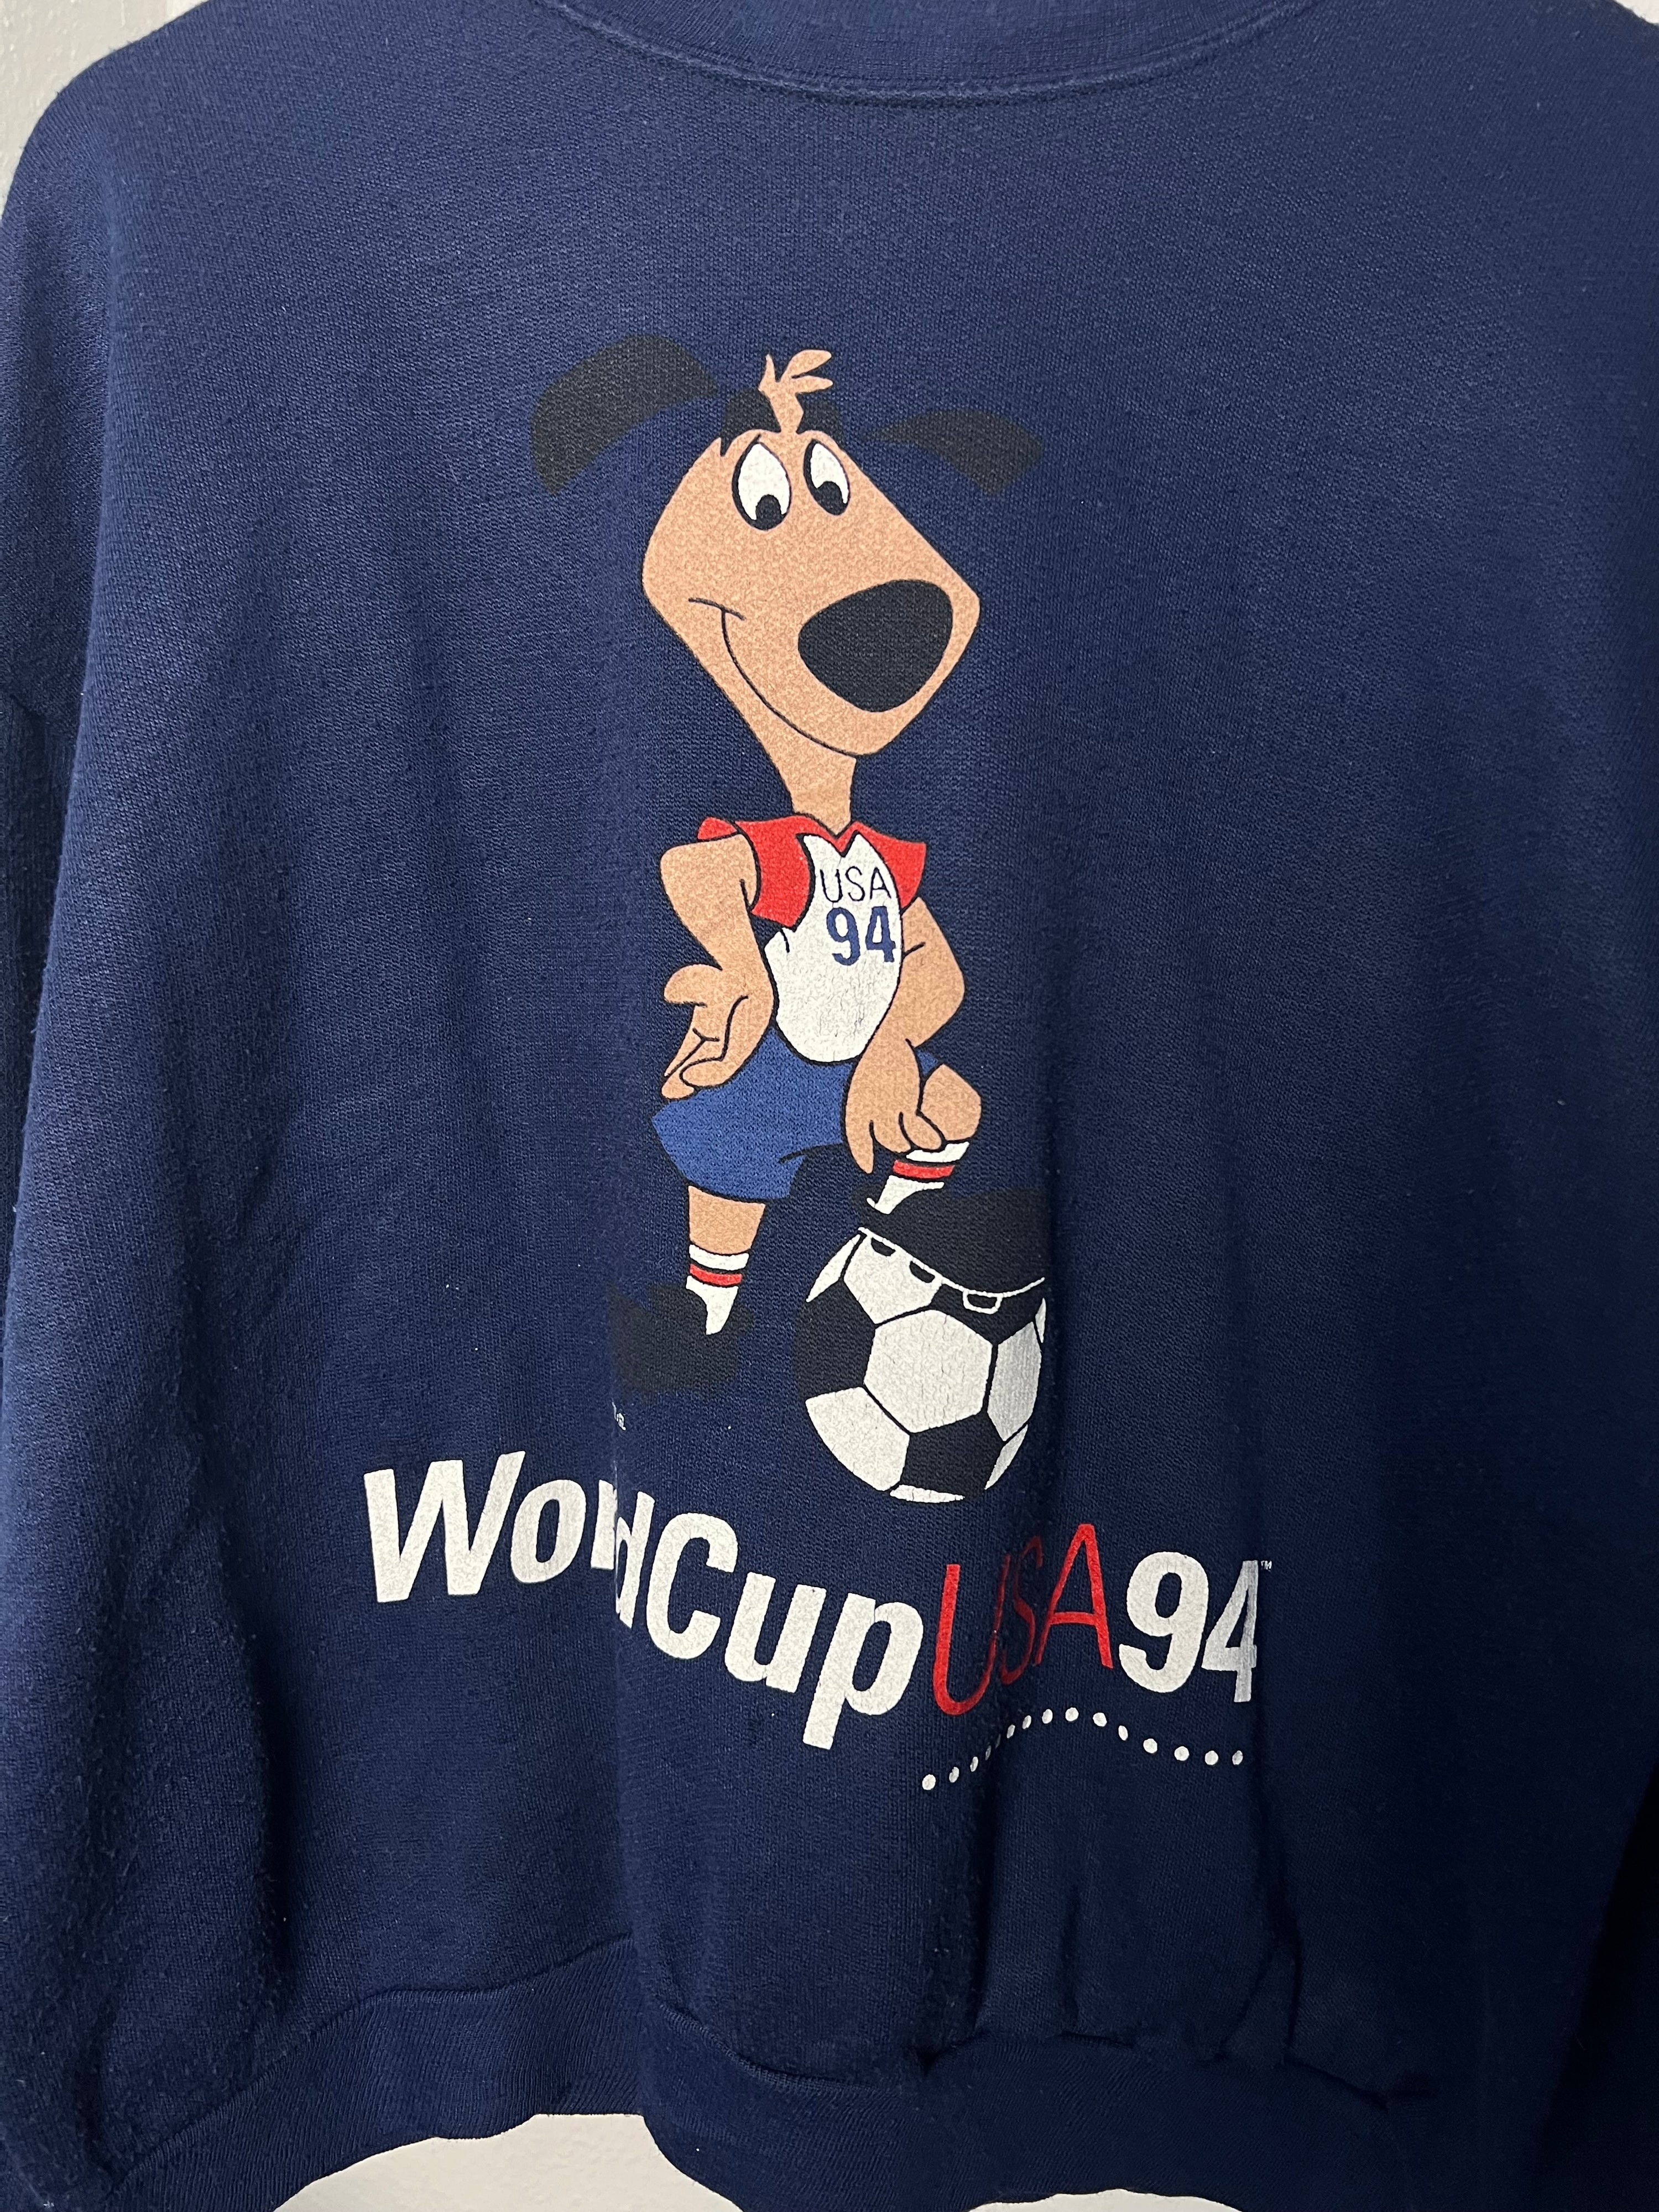 Vintage 1994 Football Soccer World Cup USA Sweater (S)